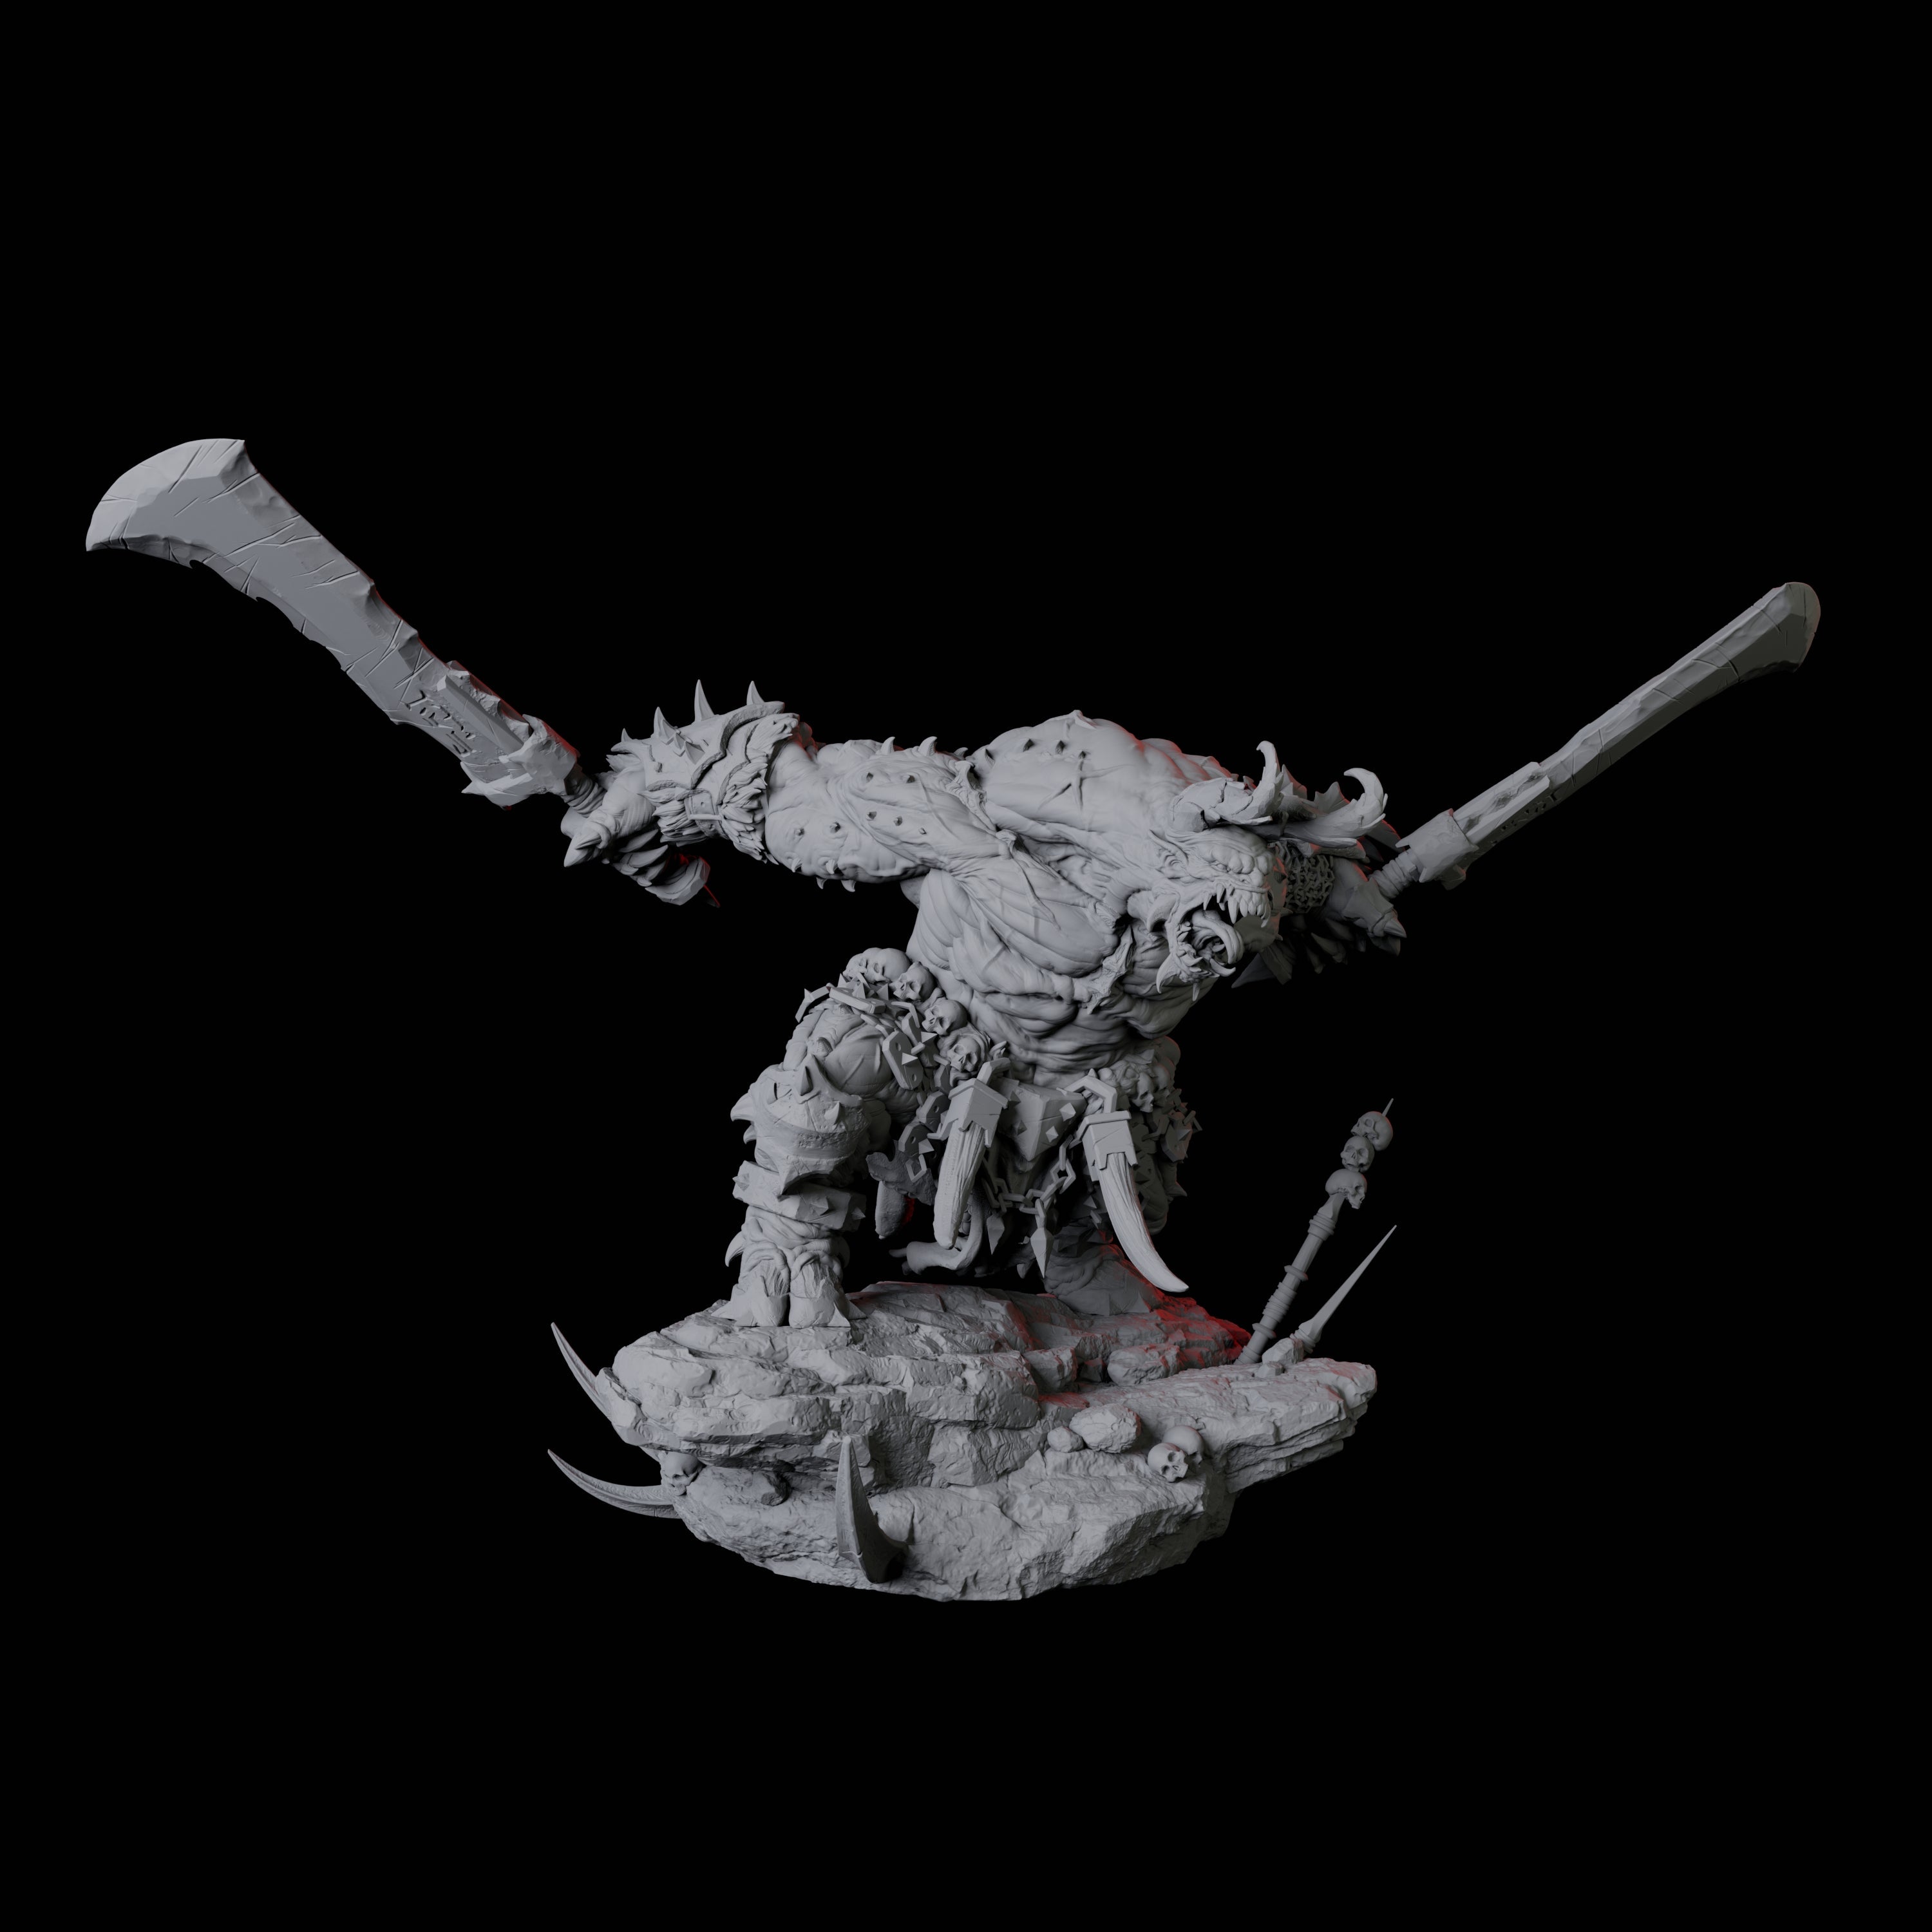 Charging Slaver Demon A Miniature for Dungeons and Dragons, Pathfinder or other TTRPGs